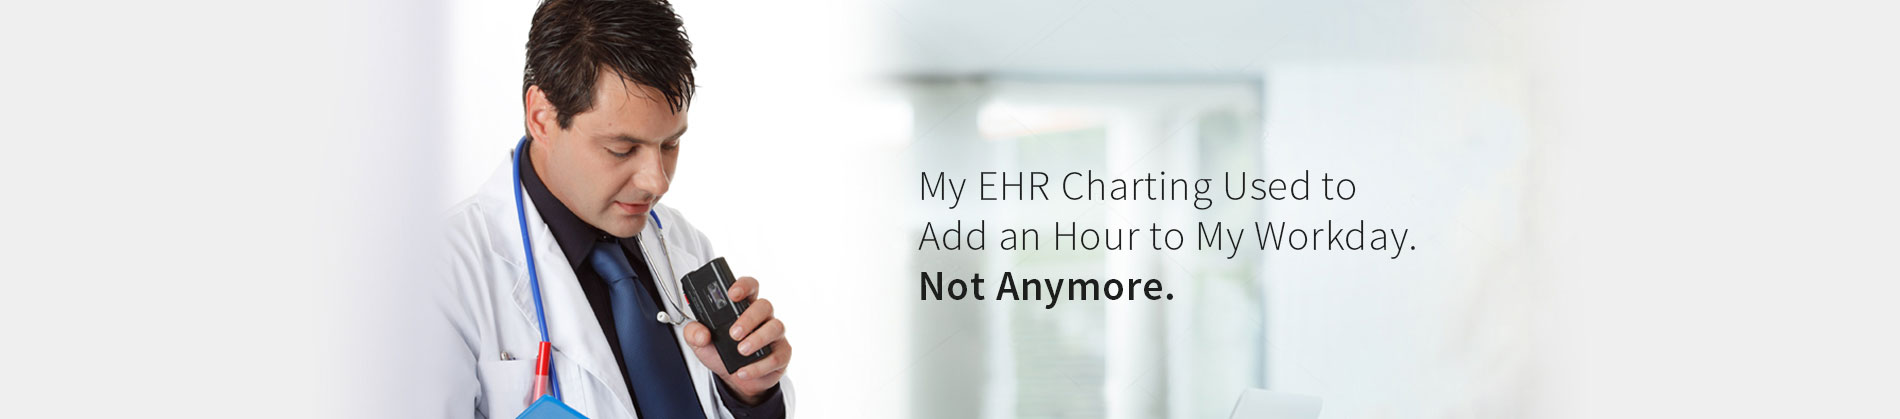 Improve EHR Usability, Simply Dictate!